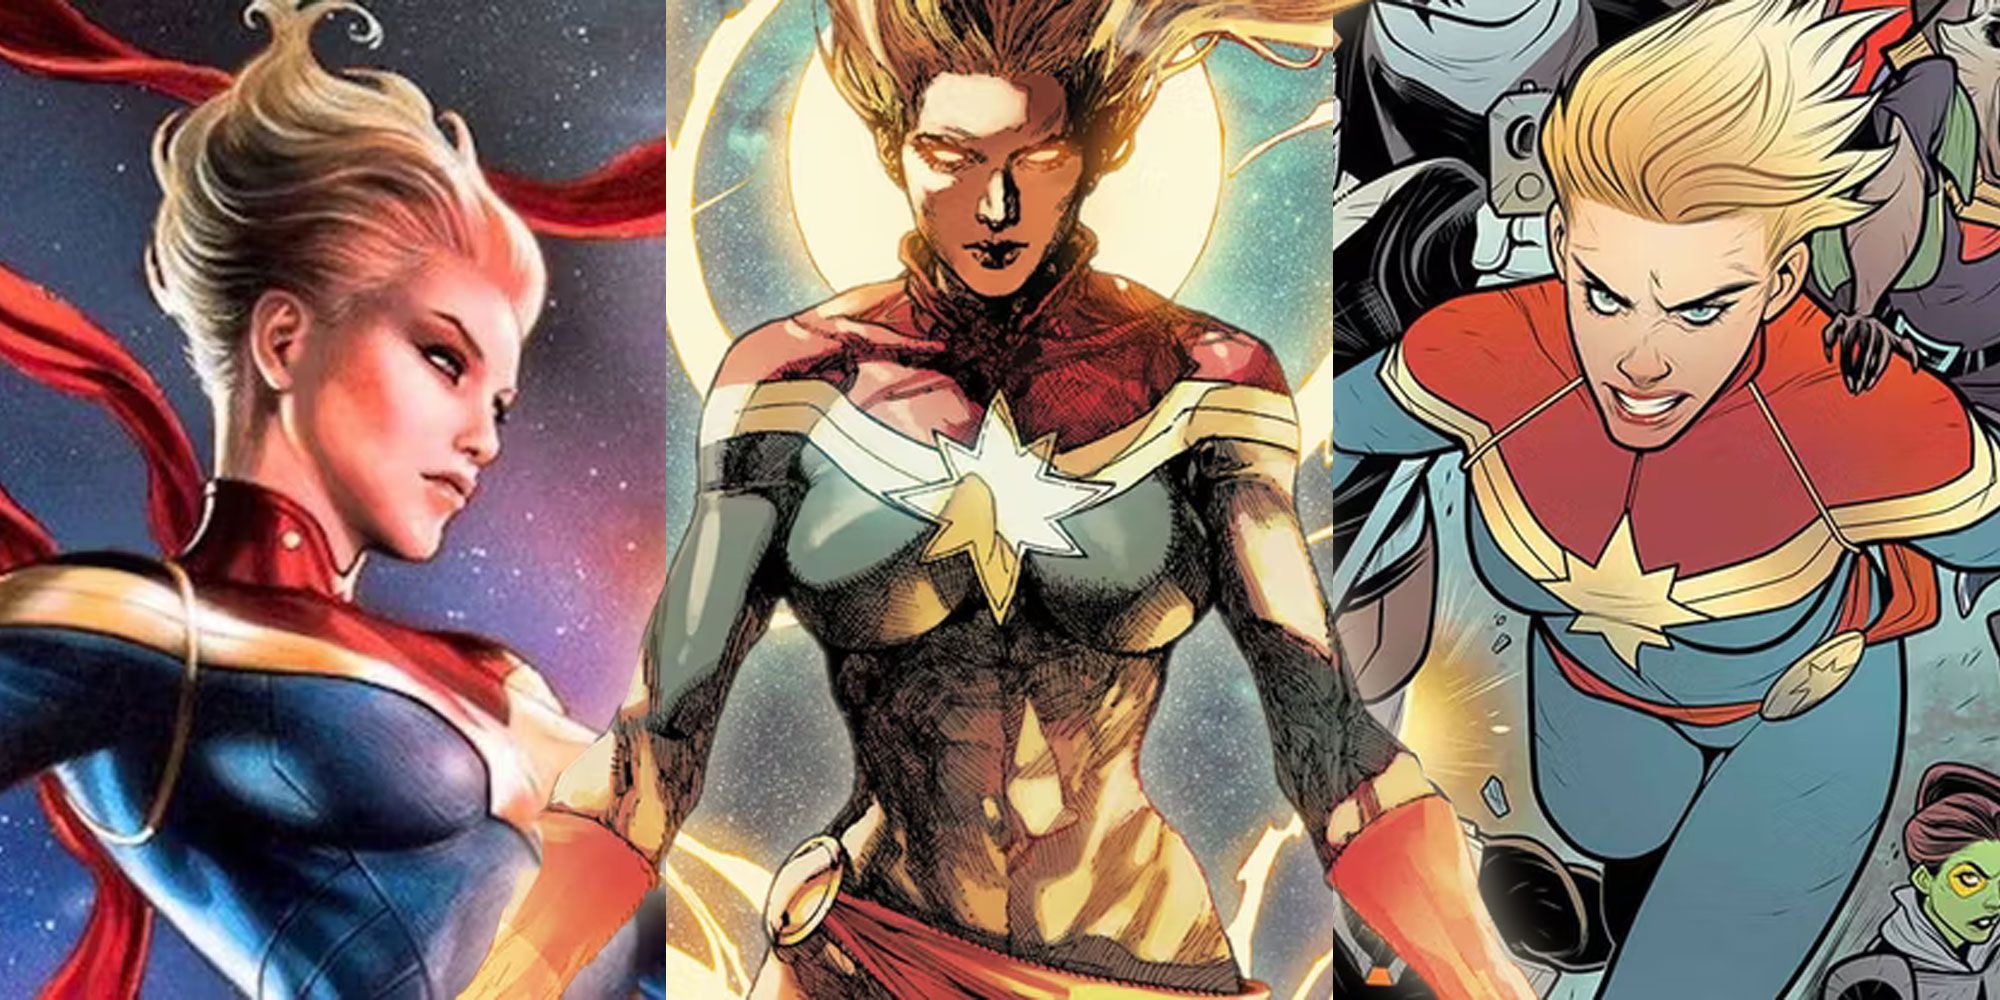 A split image features three versions of Carol Danvers as Captain Marvel in Marvel Comics